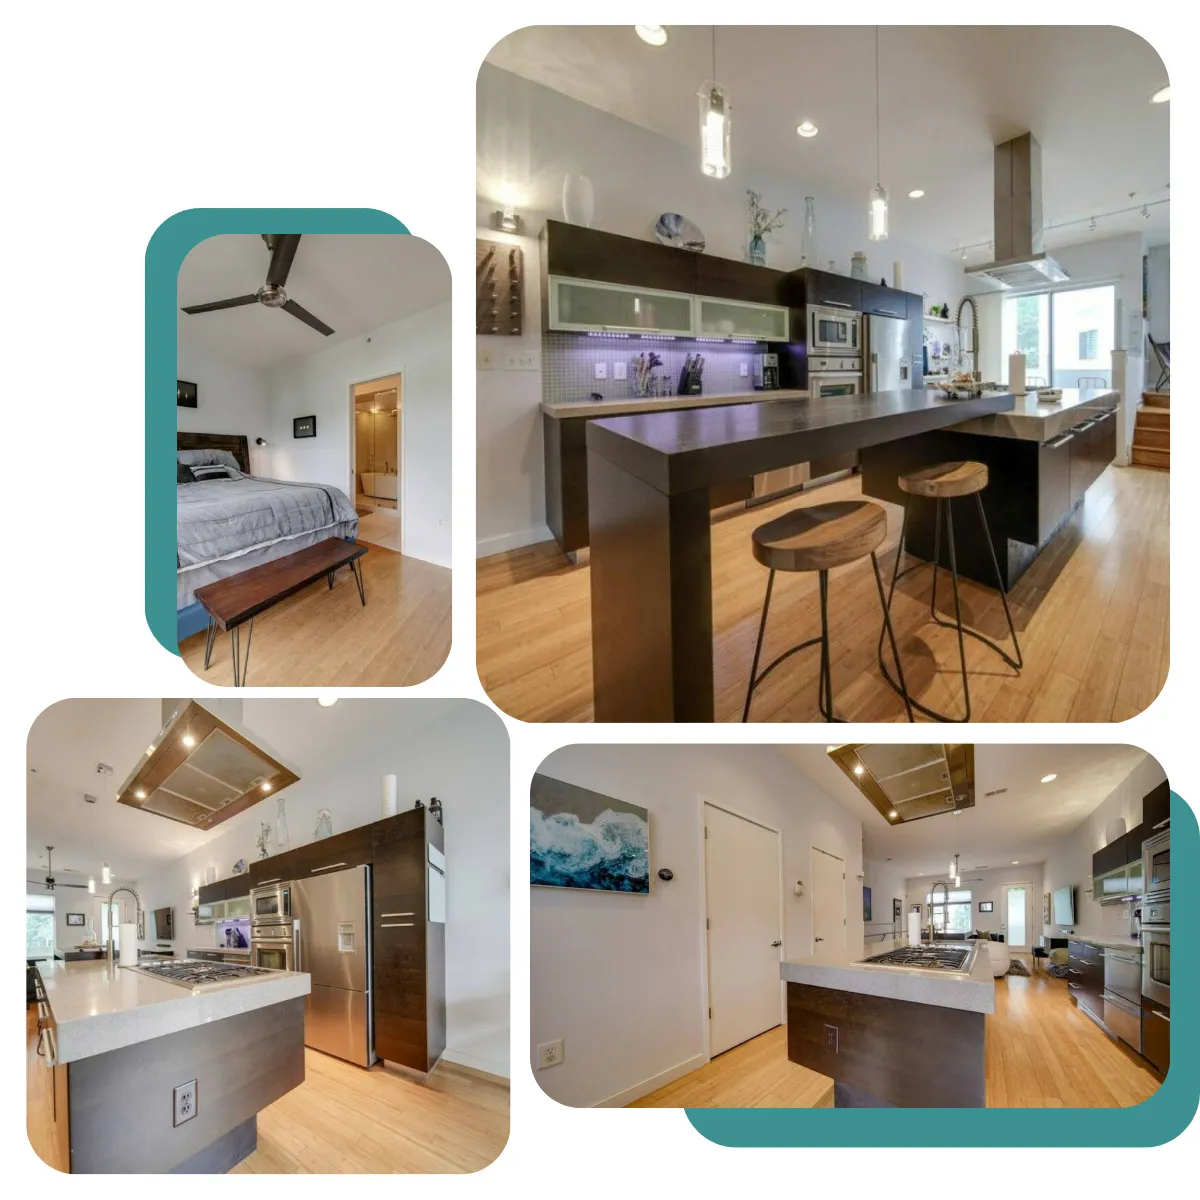 Urban Retreat's second floor has a spacious living area, kitchen, dining spot, and a balcony with modern appliances and sleek countertops for meal prep.